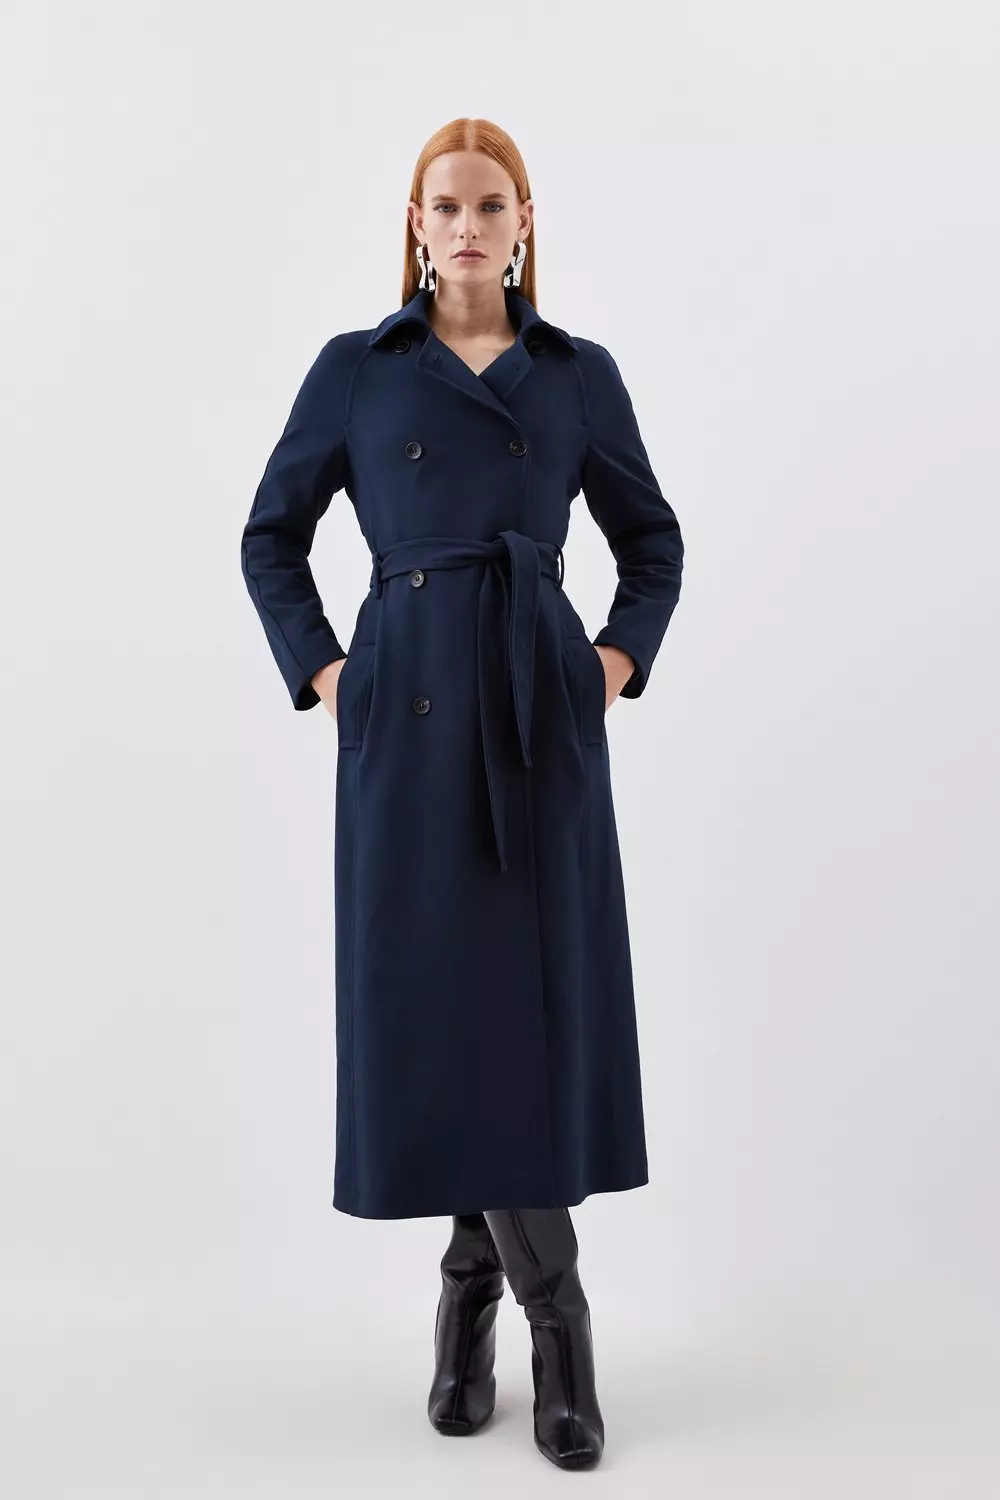 Long Double Breasted Trench Deep Navy Coat